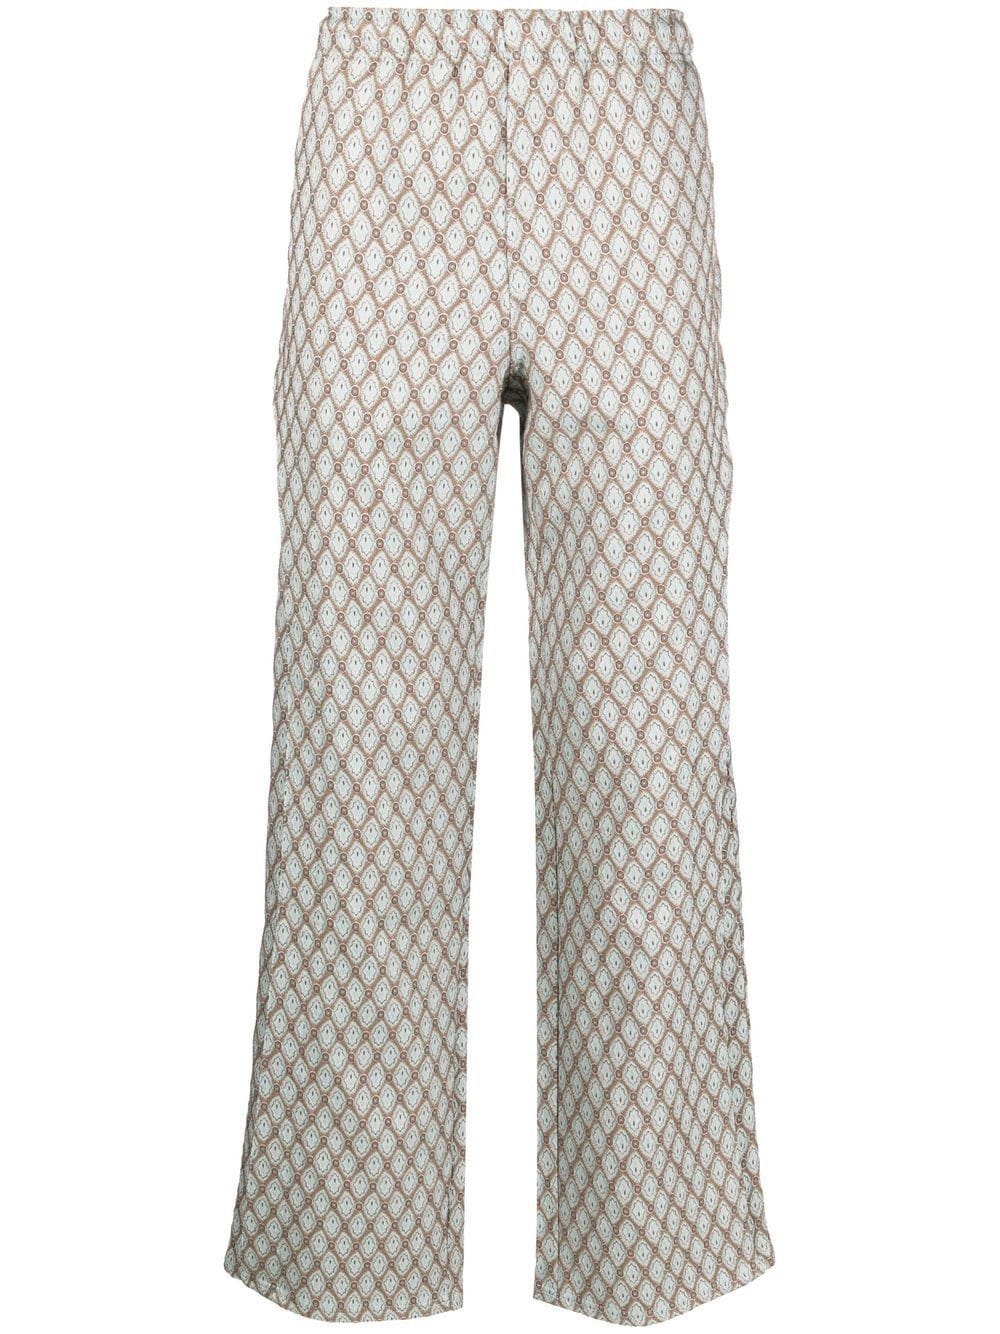 ANDERSSON BELL BEIGE TROUSERS WITH JACQUARD PATTERN AND OVERLAYS